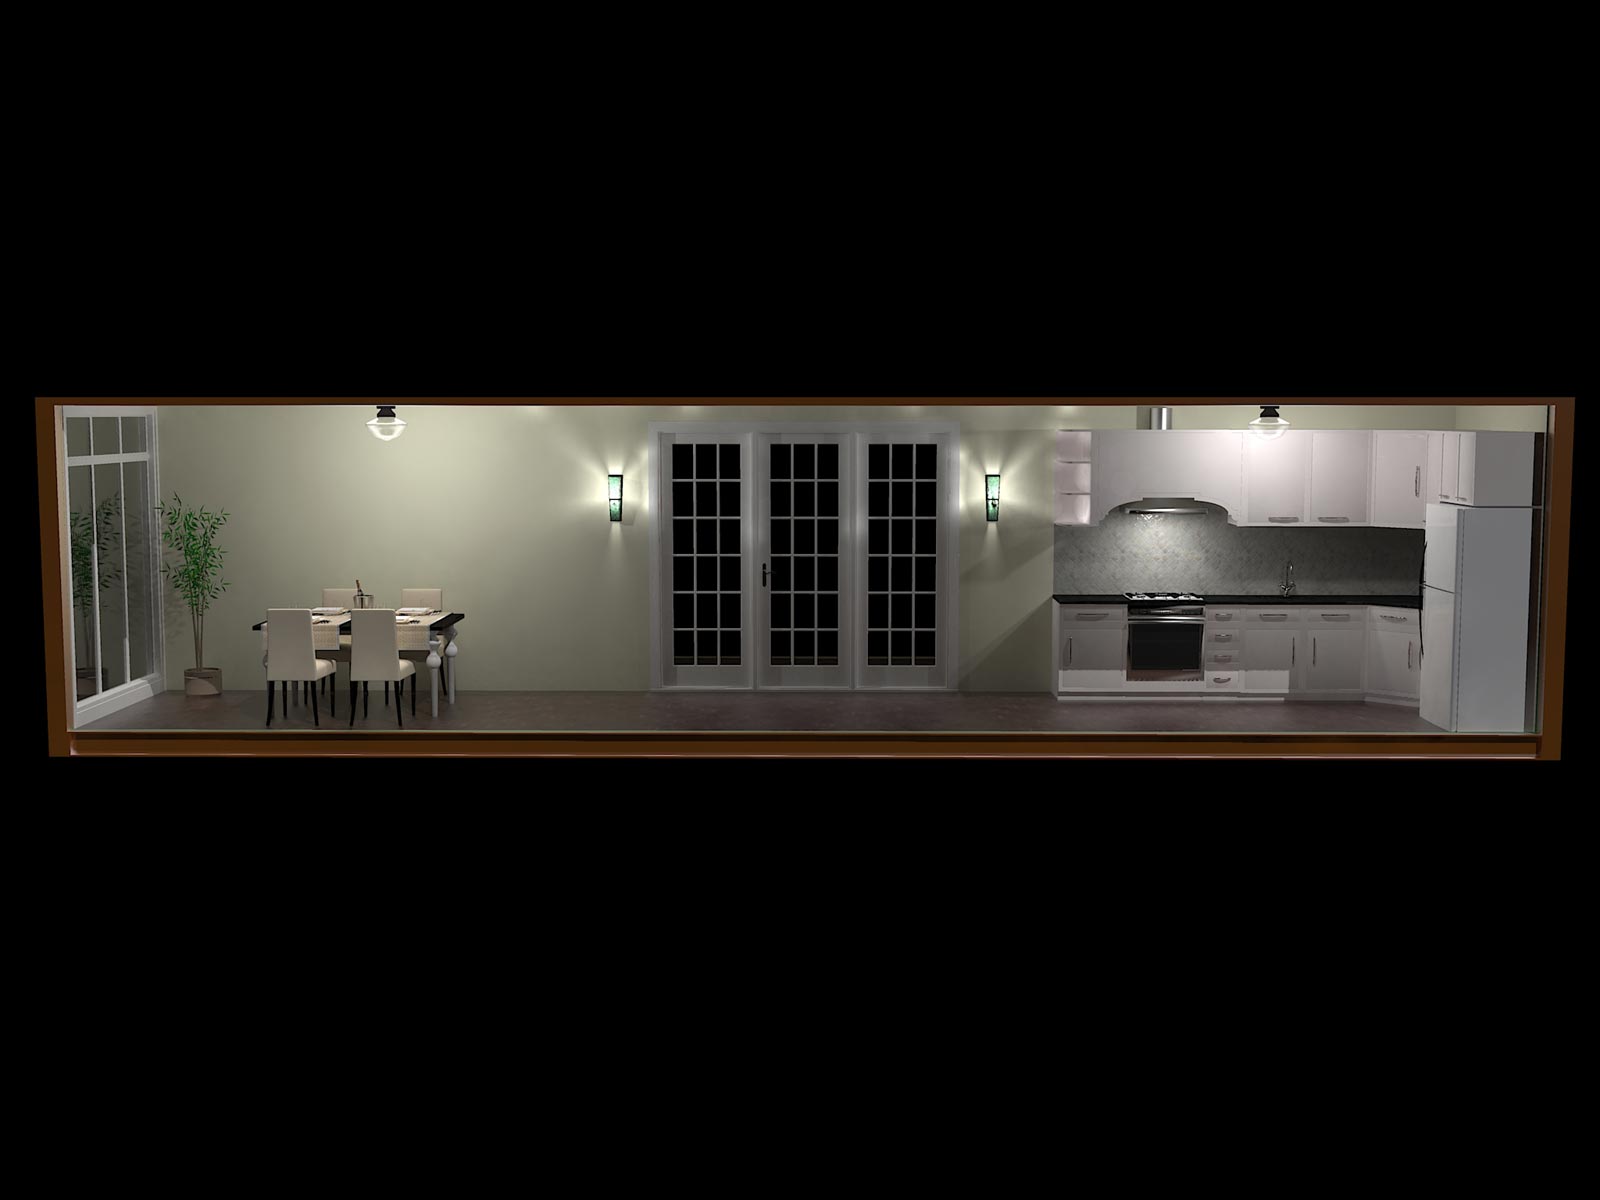 This is a Kitchen/Dining area shipping container home module. This is the raw render full view of this unit. No post production.